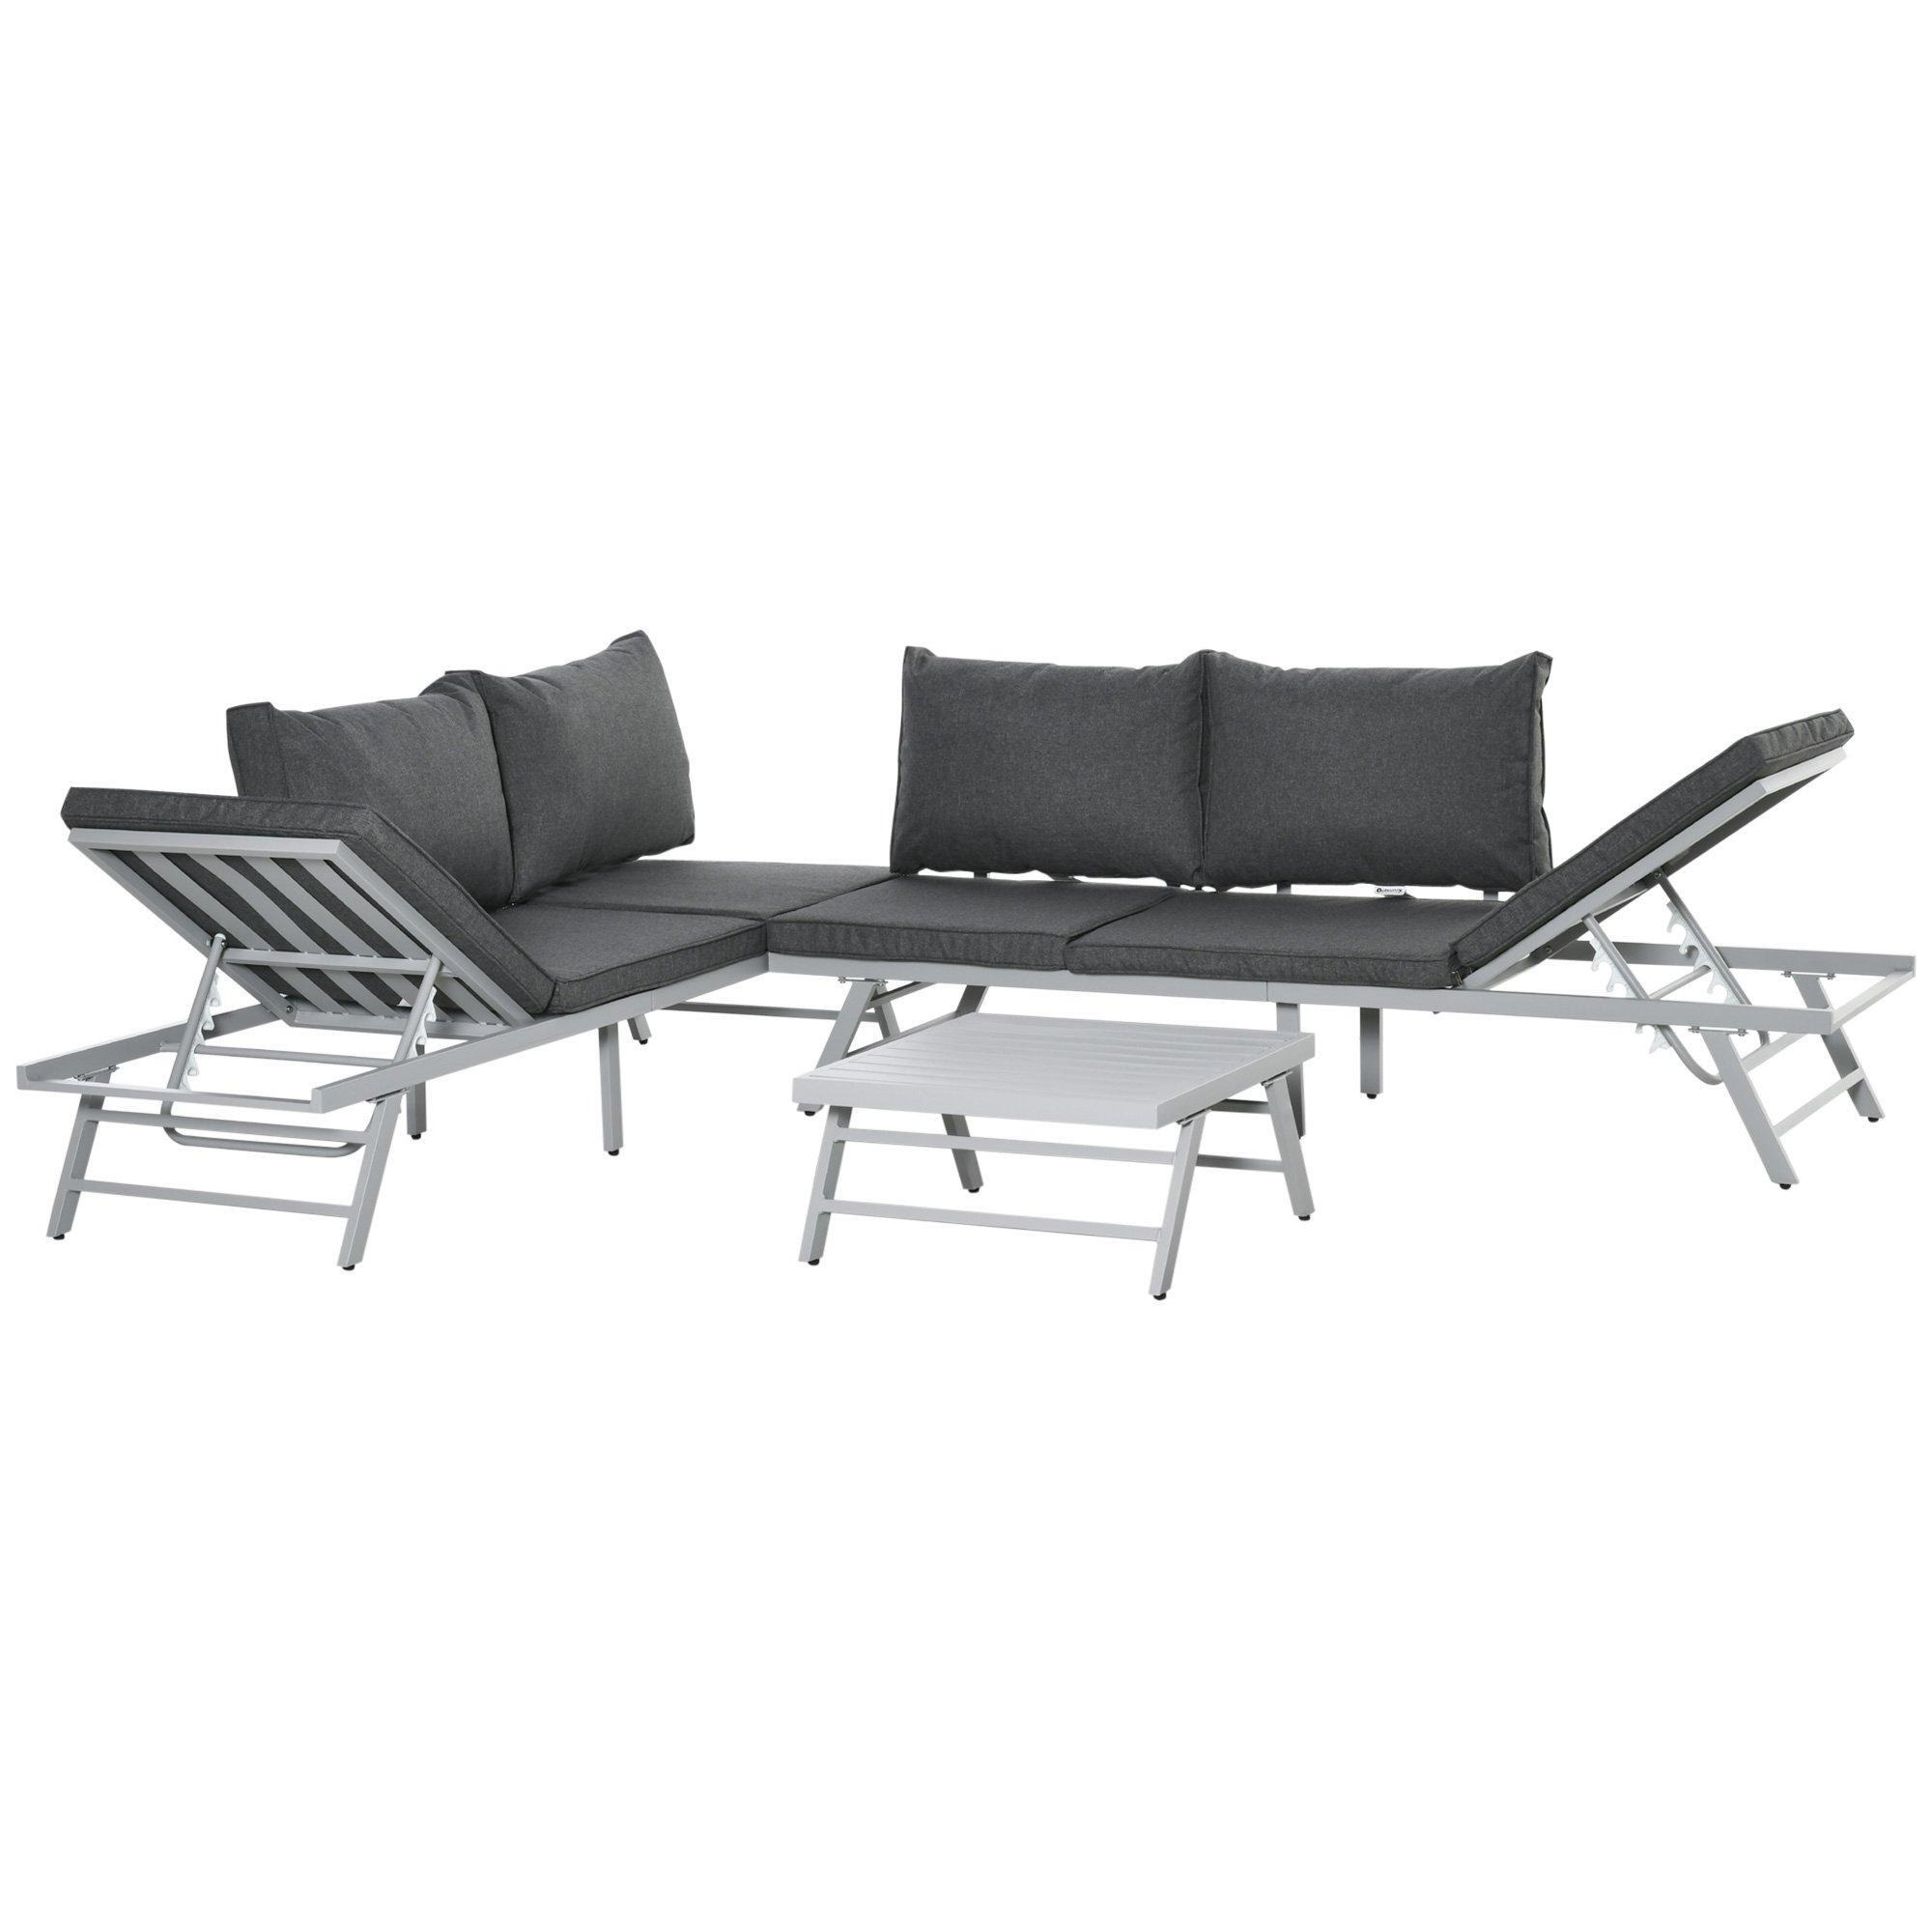 3 Pcs Garden Seating Set with Sofa Lounge Table Outdoor Patio - image 1